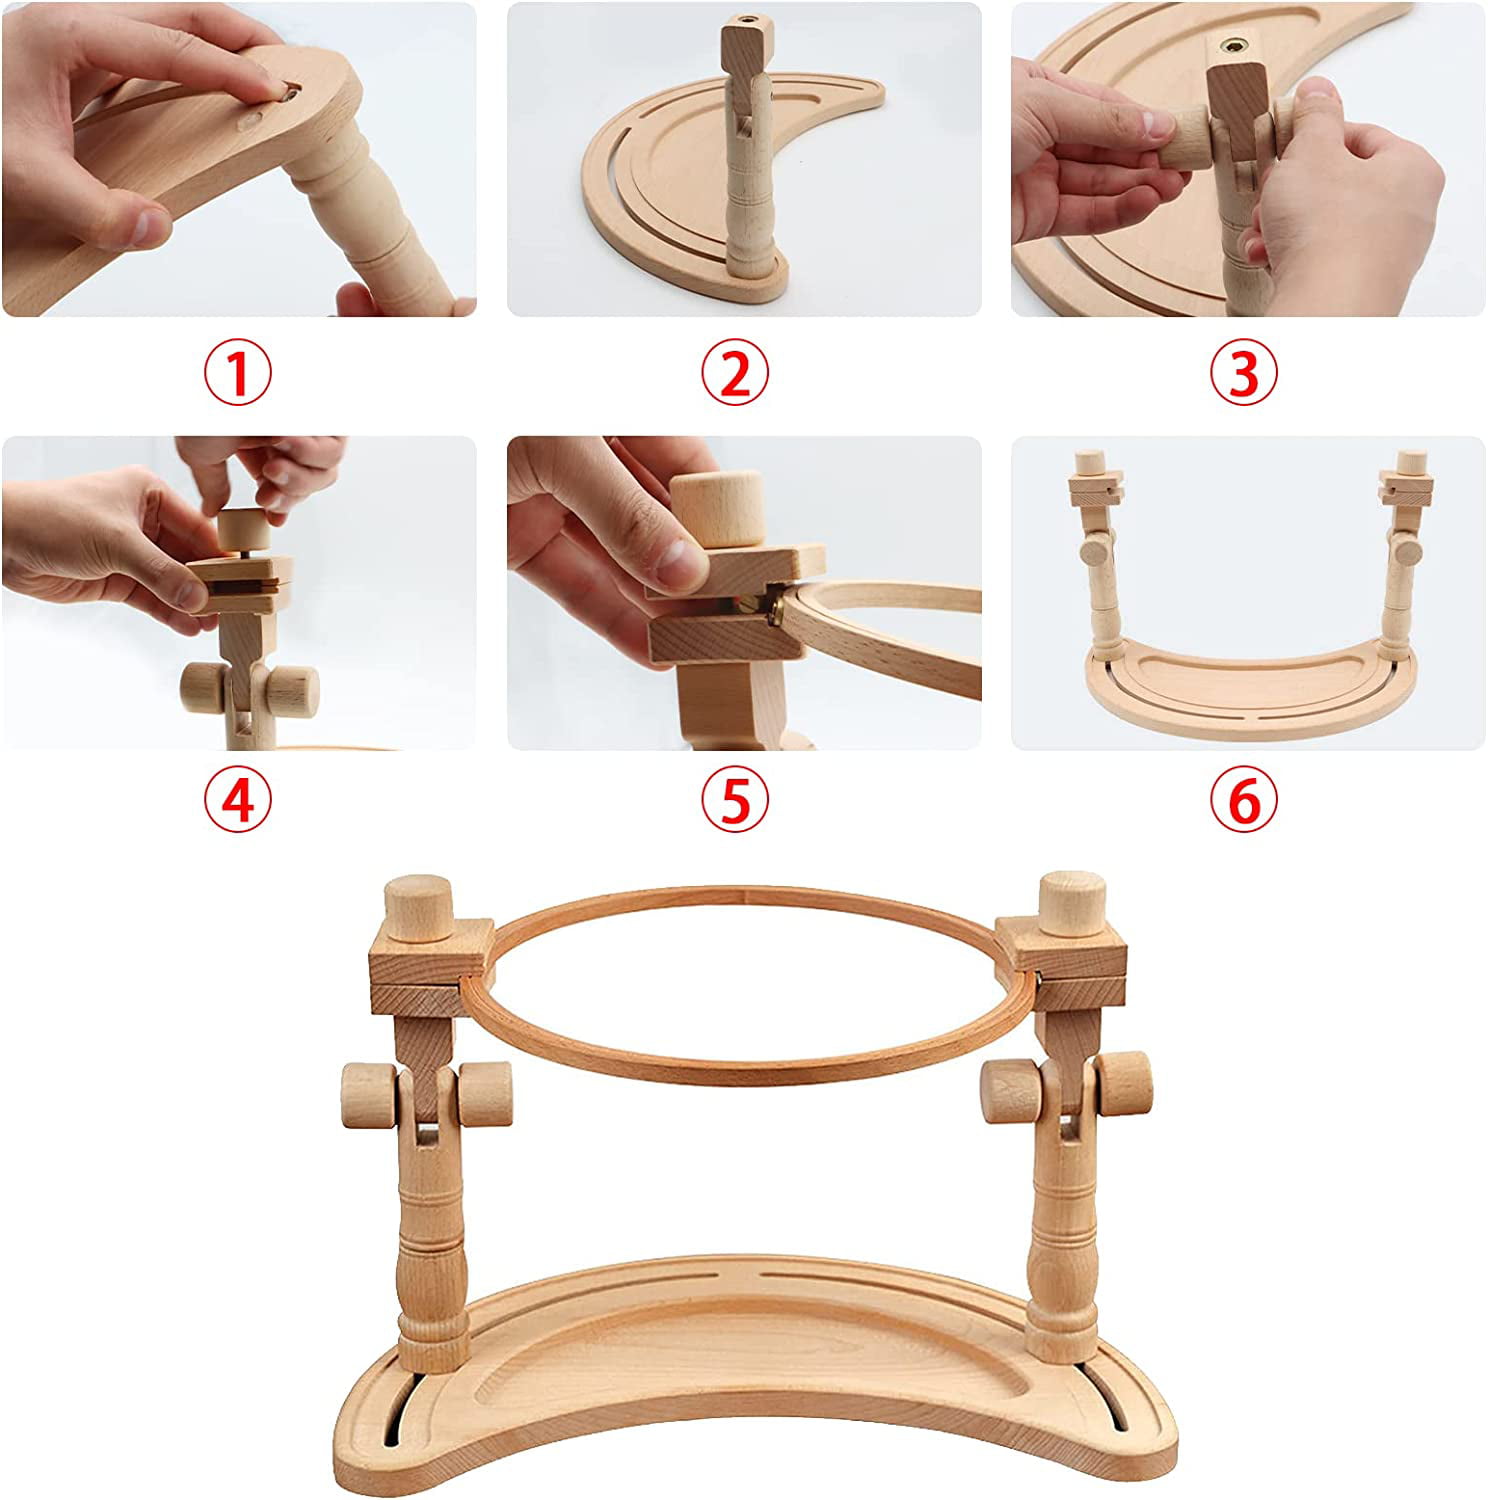 jasvelly adjustable embroidery stand, rotated cross stitch hoop holder,  wood 983234 embroidery stand embroidery hoop stand